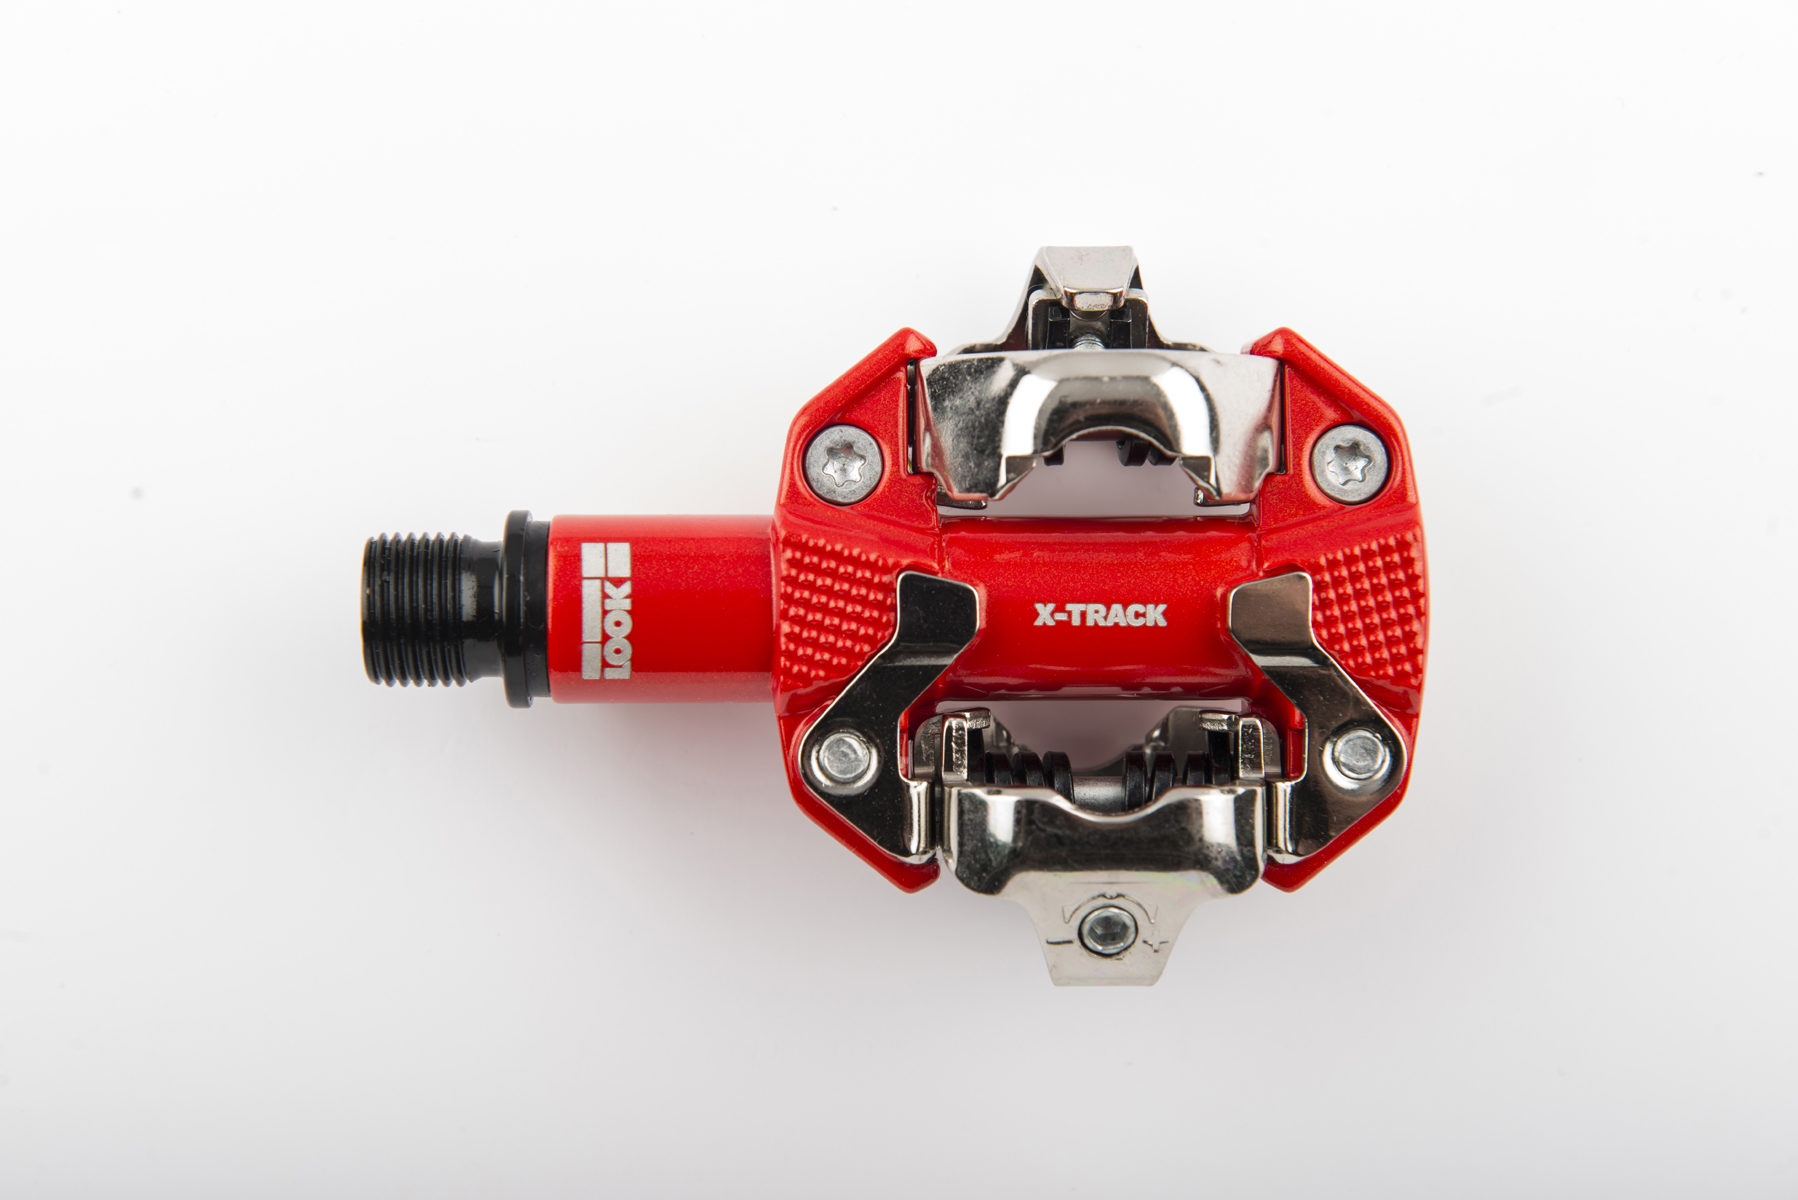 Look at it again with new SPD compatible X-Track MTB clipless pedal